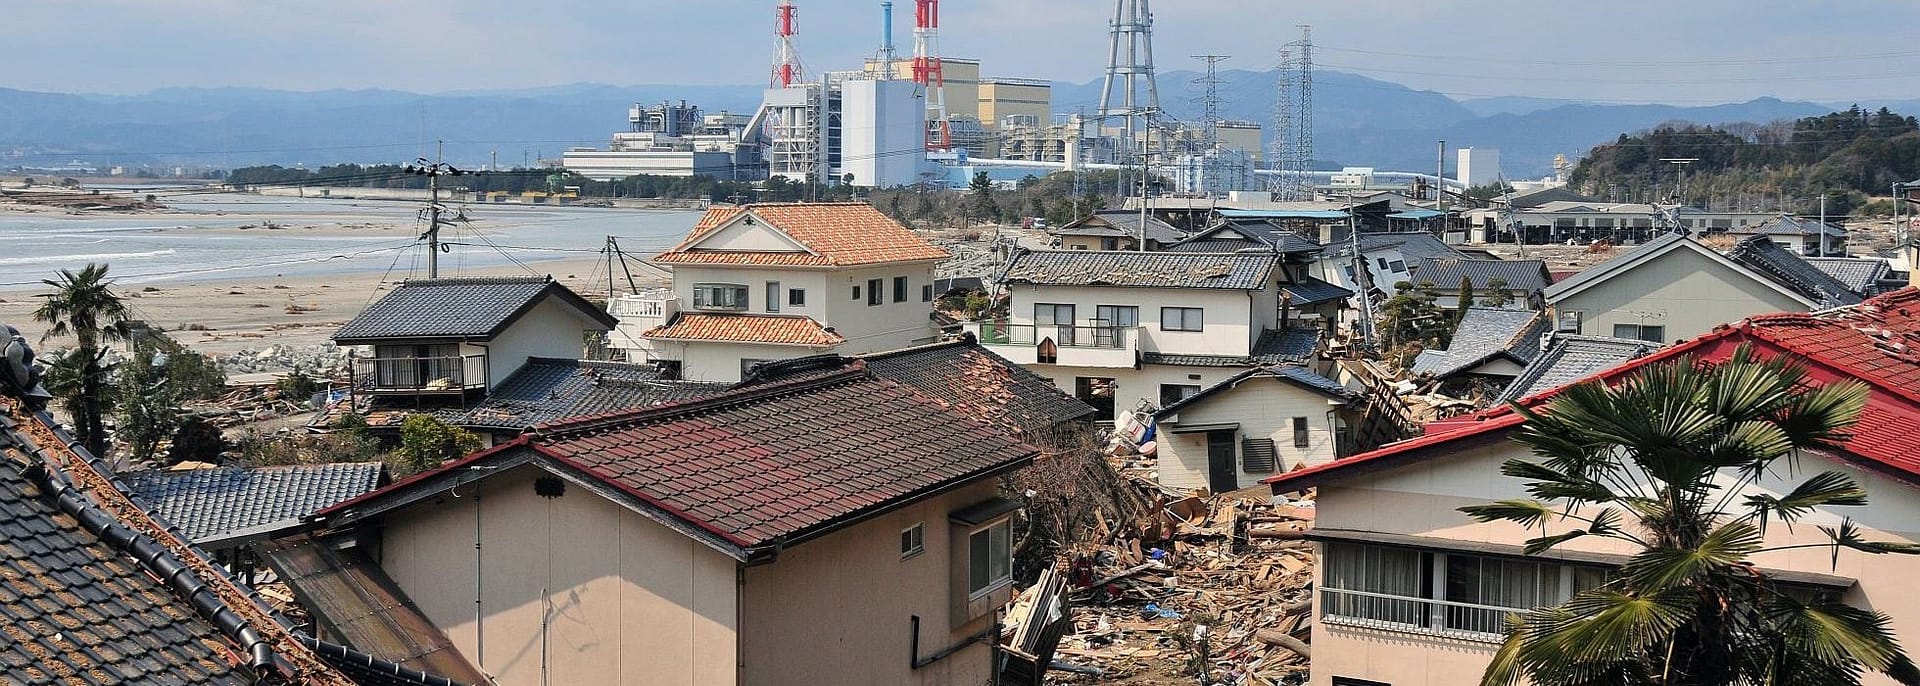 Destroyed buildings and debris near river after Tohoku earthquake and tsunami